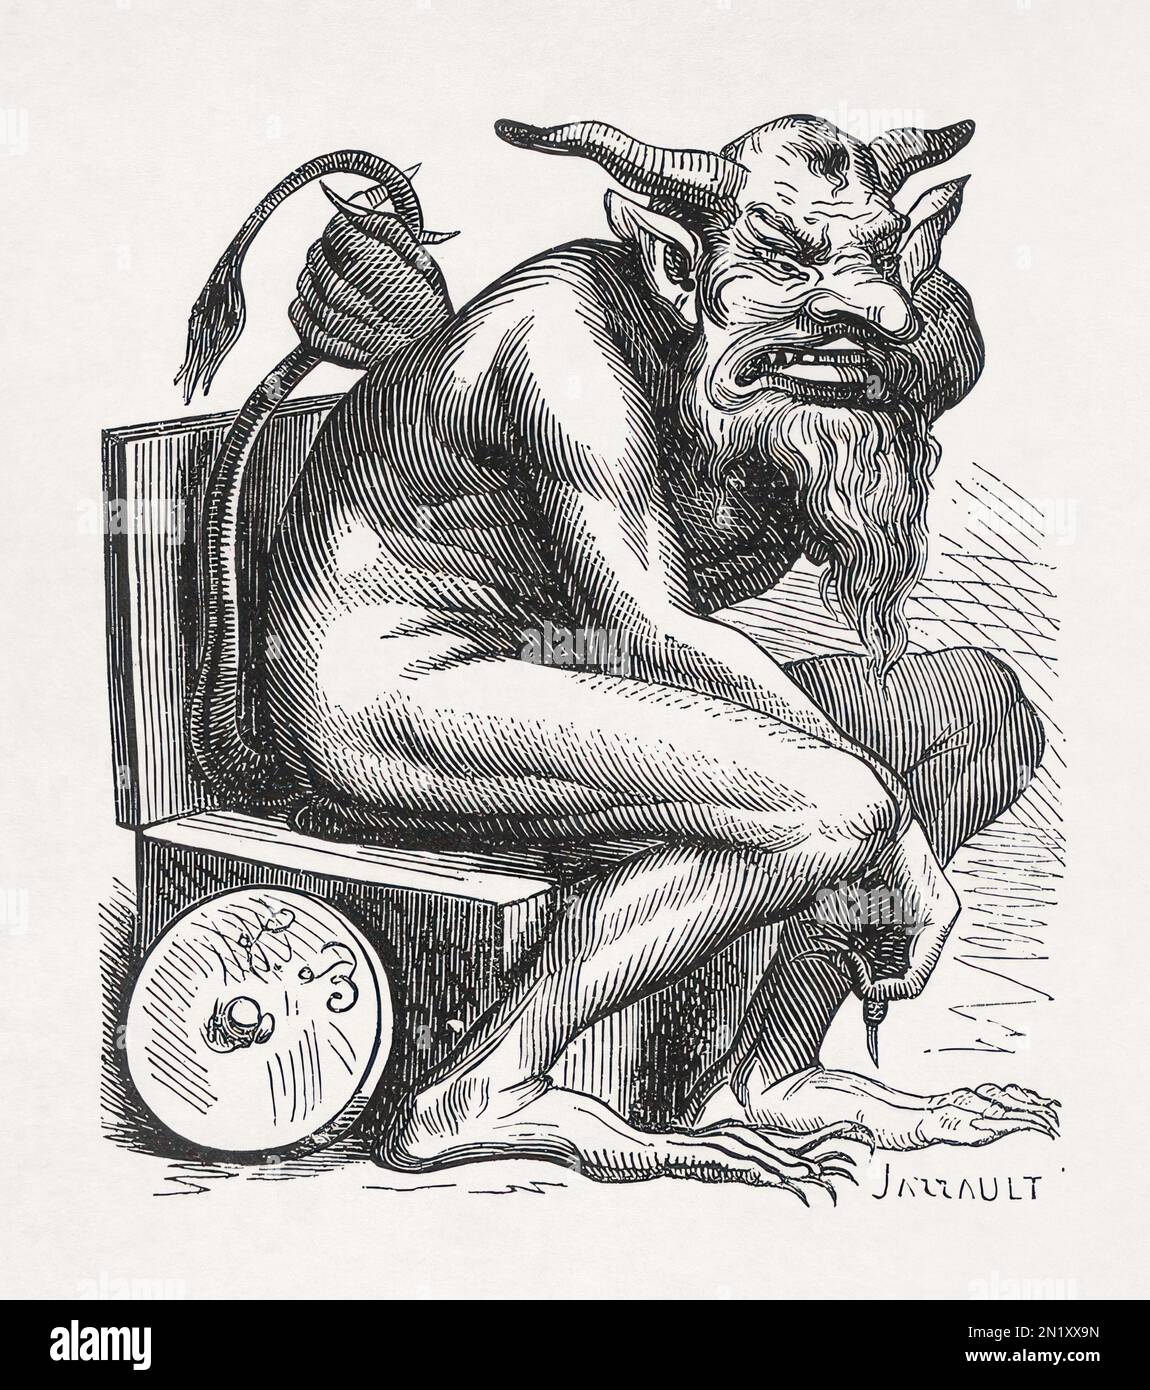 Belphegor by Louis Le Breton made in 1863 for the Dictionnaire infernal writen by Jacques Collin de Plancy. Stock Photo